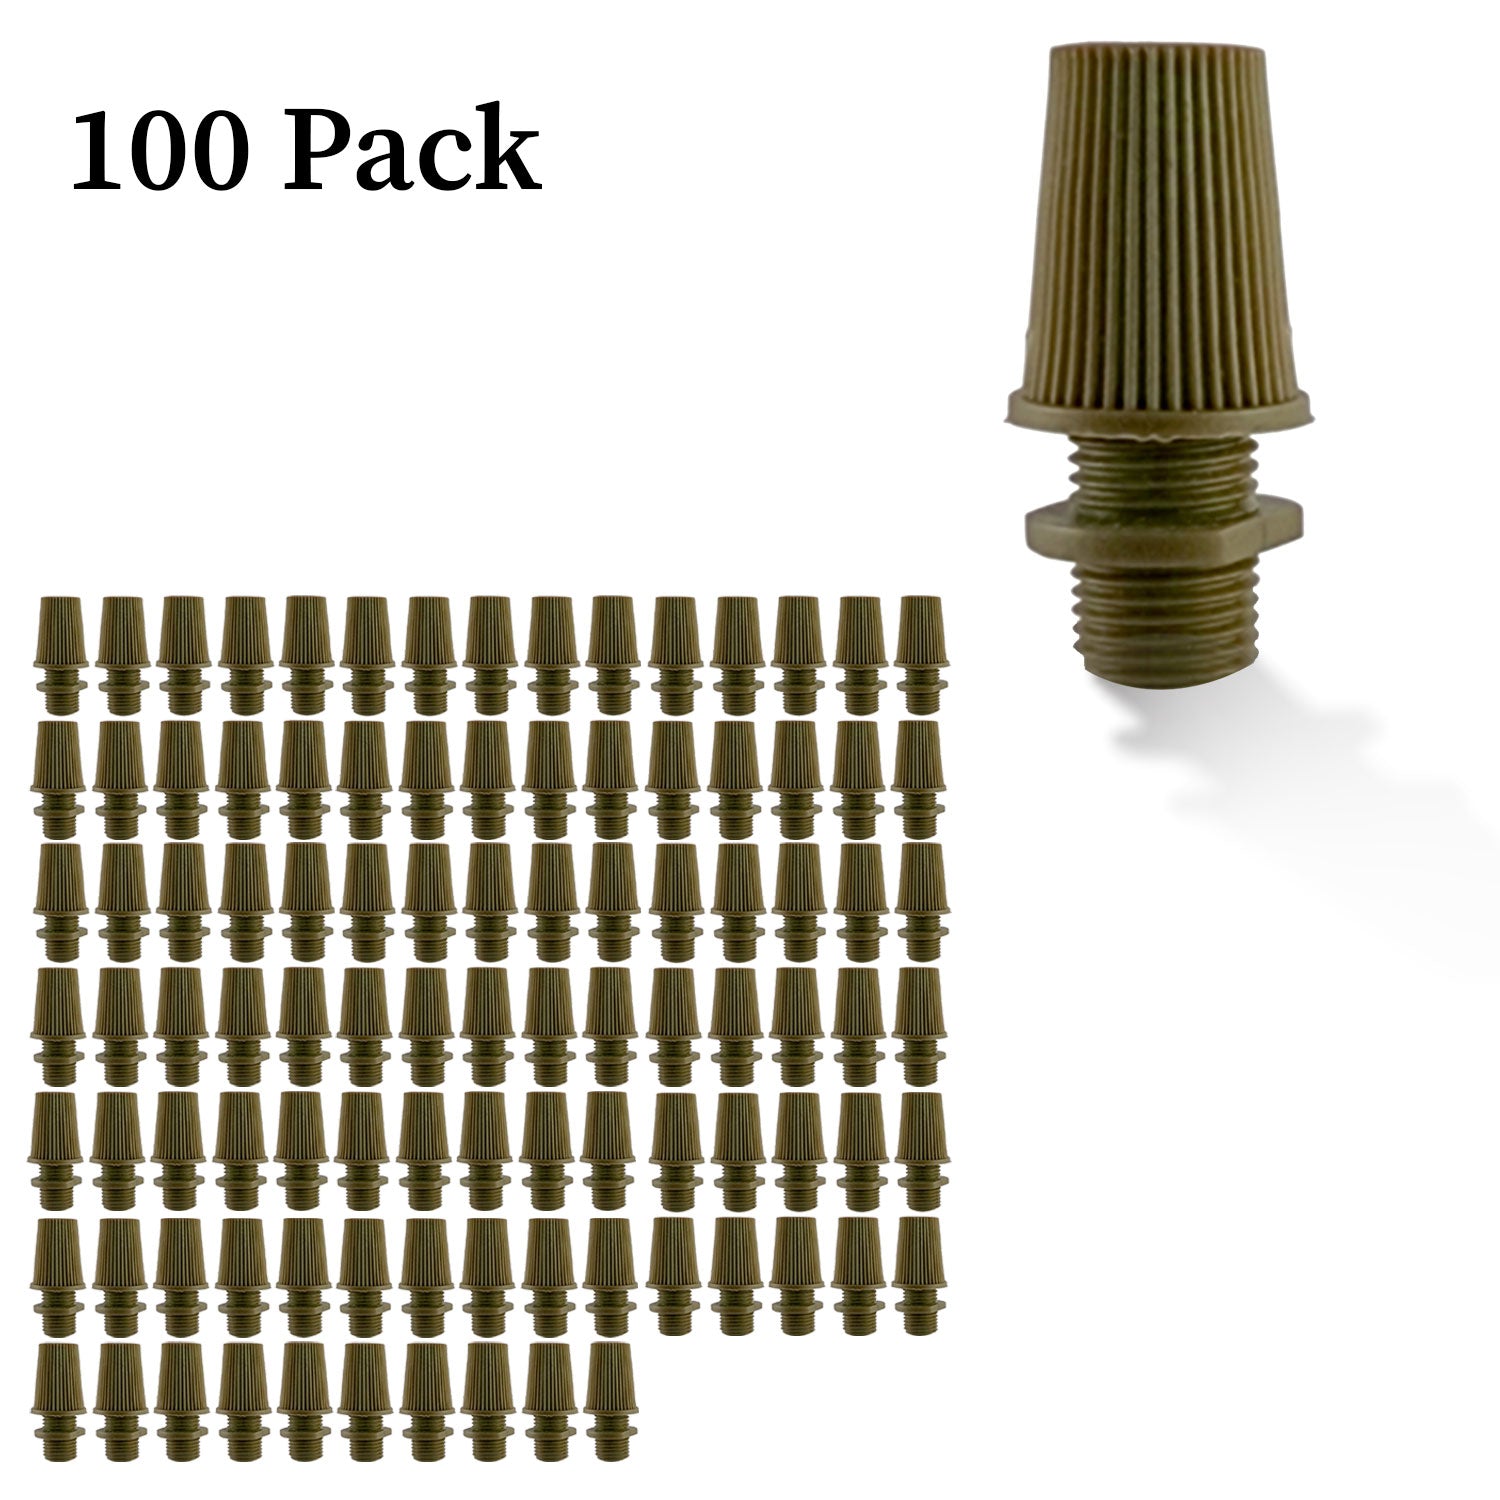 100 pack 100mm army green cable cord grip lock